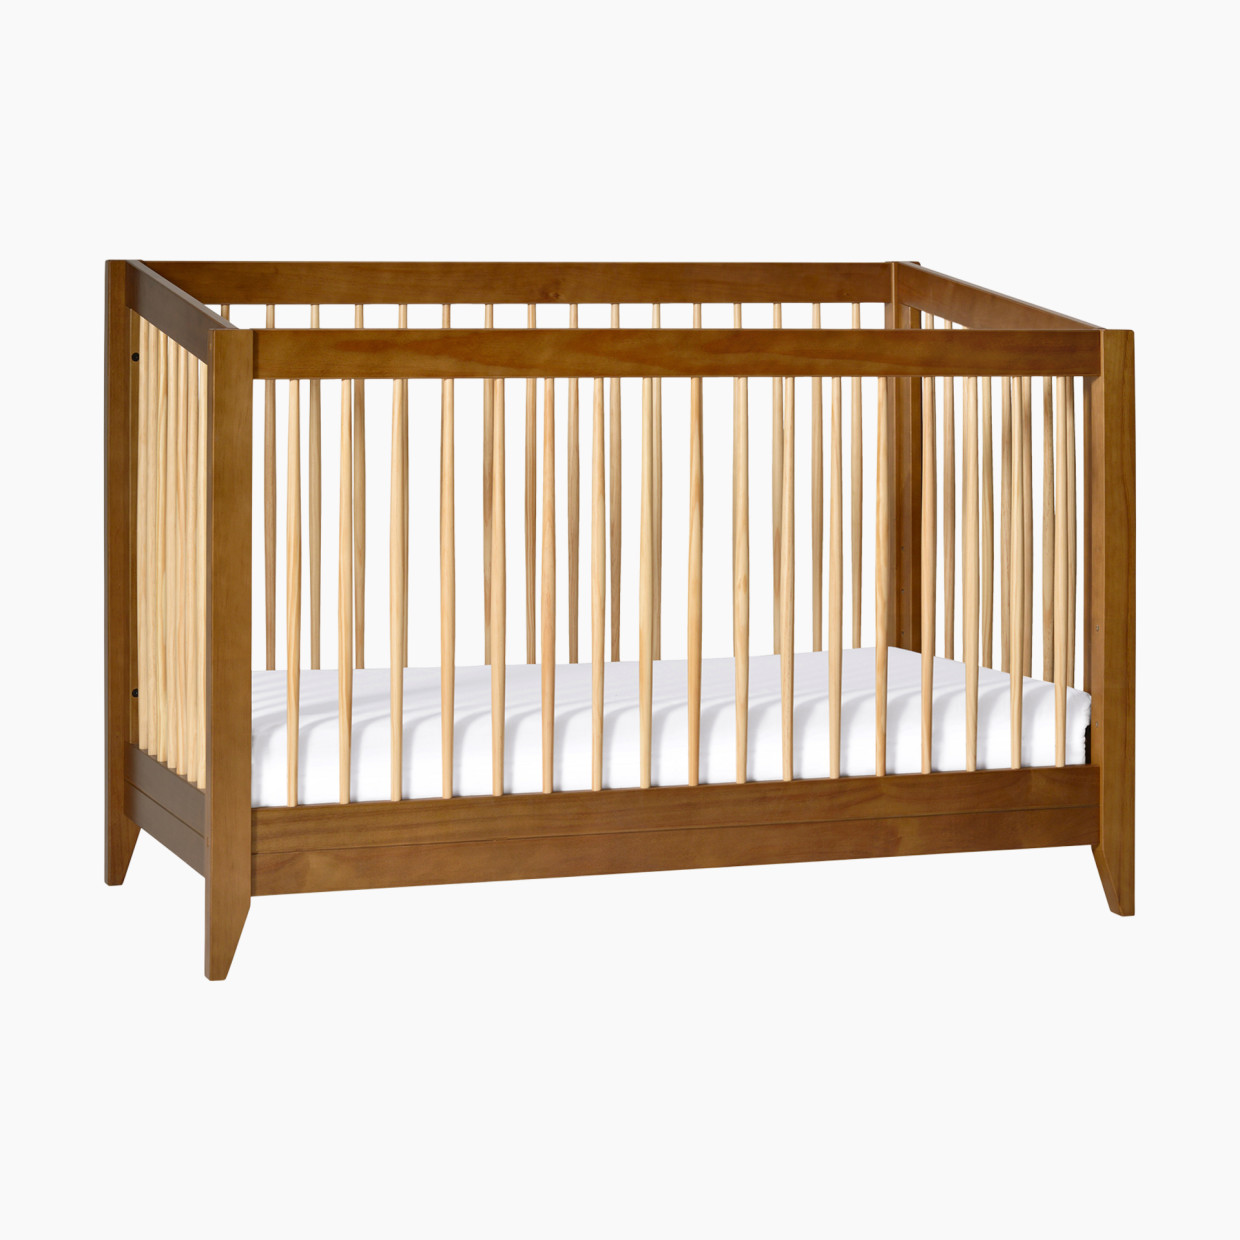 babyletto Sprout 4-in-1 Convertible Crib with Toddler Bed Conversion Kit - Chestnut/Natural.